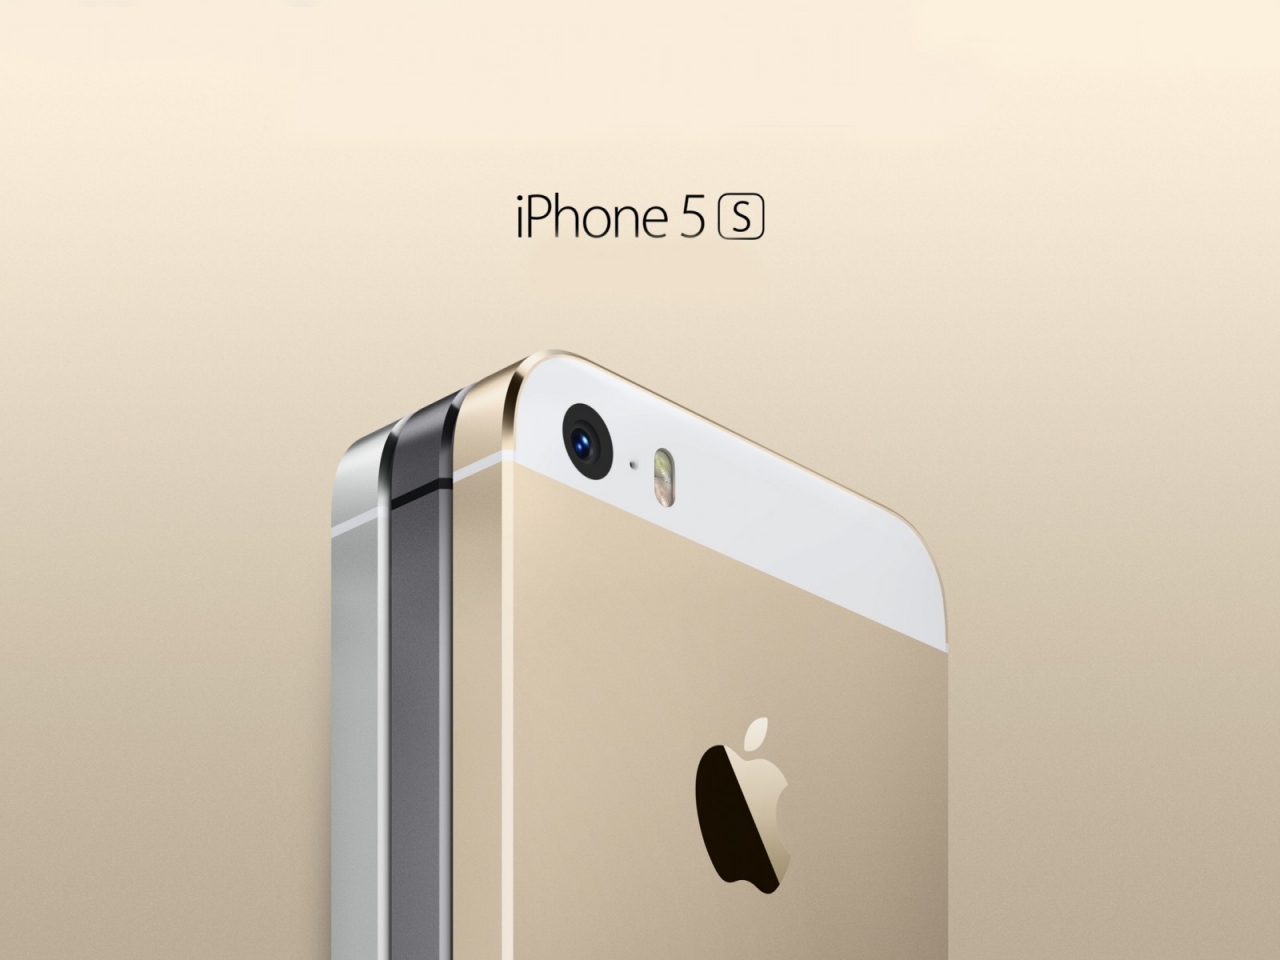 Cool iPhone 5S for 1280 x 960 resolution